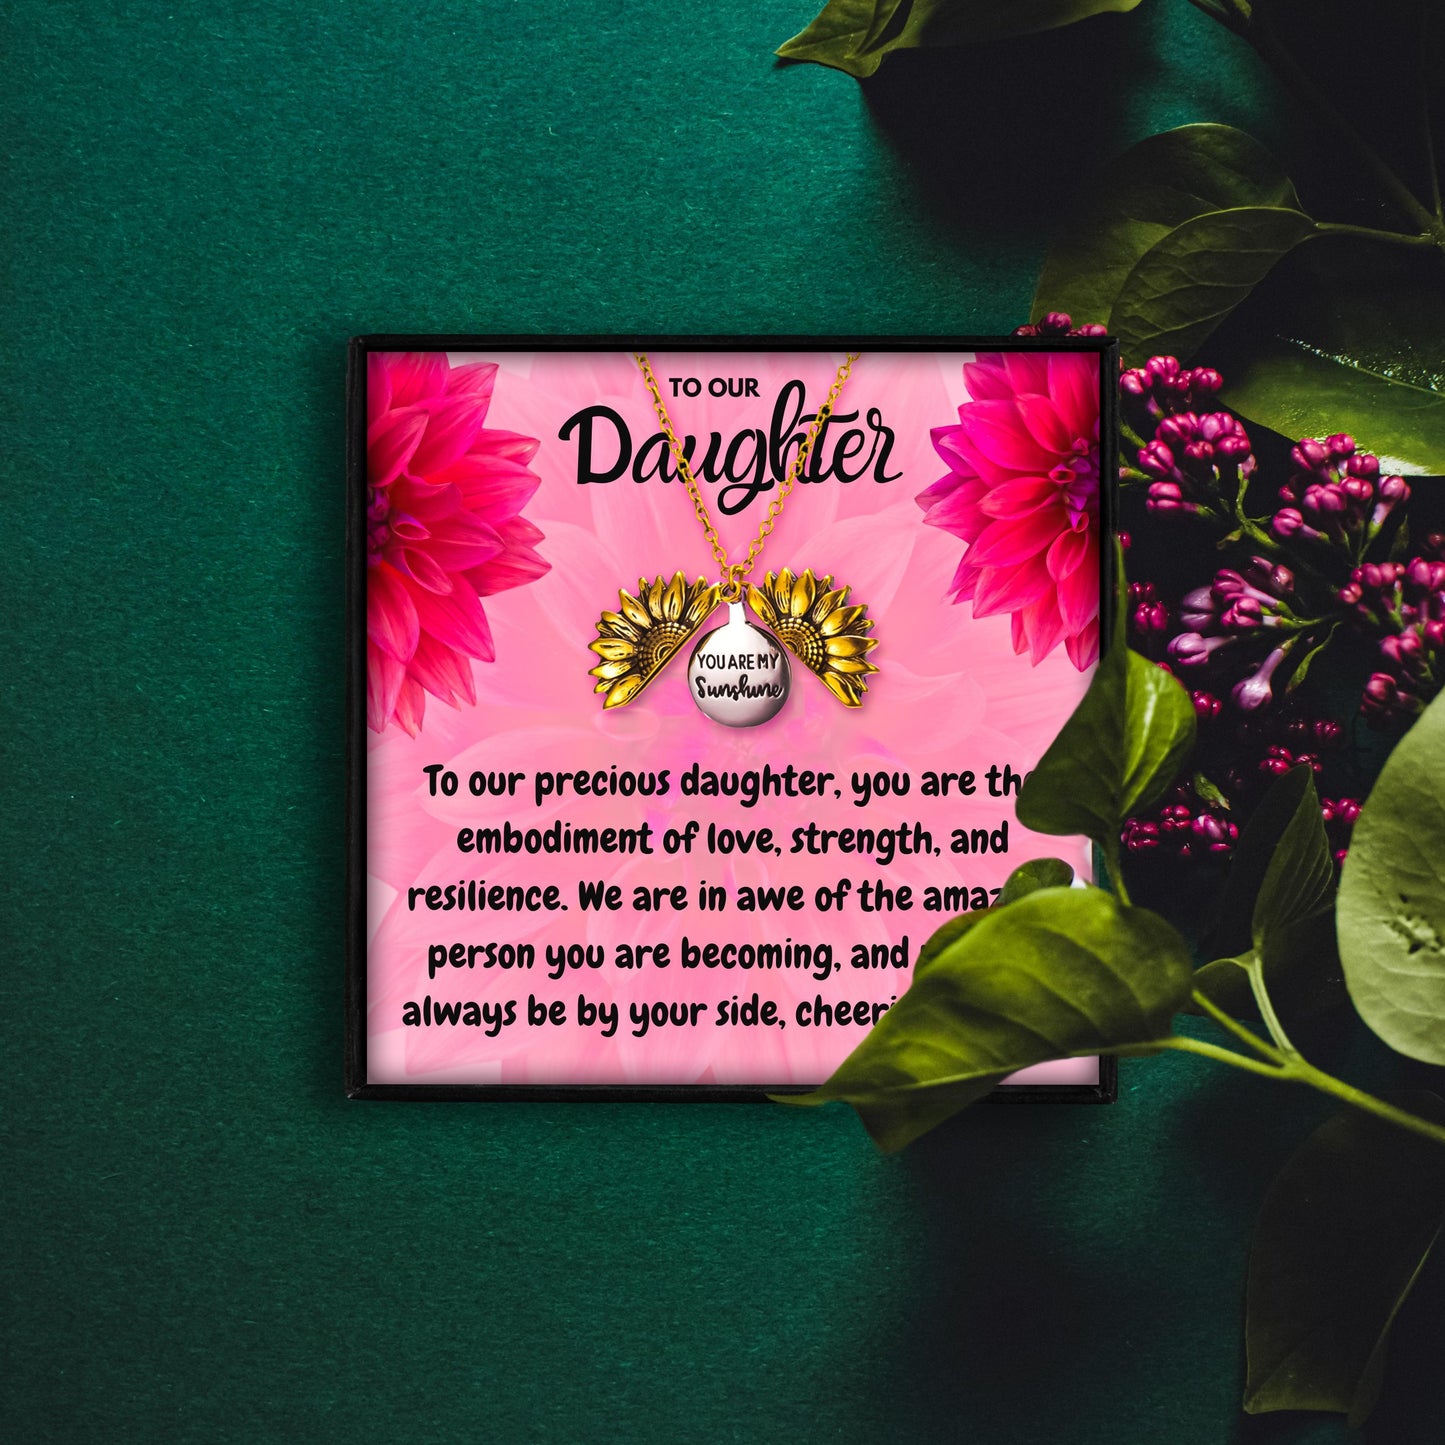 Necklace Gift for Daughter from Mom and Dad for Christmas 2023 | Necklace Gift for Daughter from Mom and Dad - undefined | daughter gift ideas, Daughter Necklace, Meaningful Daughter Necklaces, Mother Daughter Necklace, To my daughter necklace, To my daughter necklace from mom | From Hunny Life | hunnylife.com